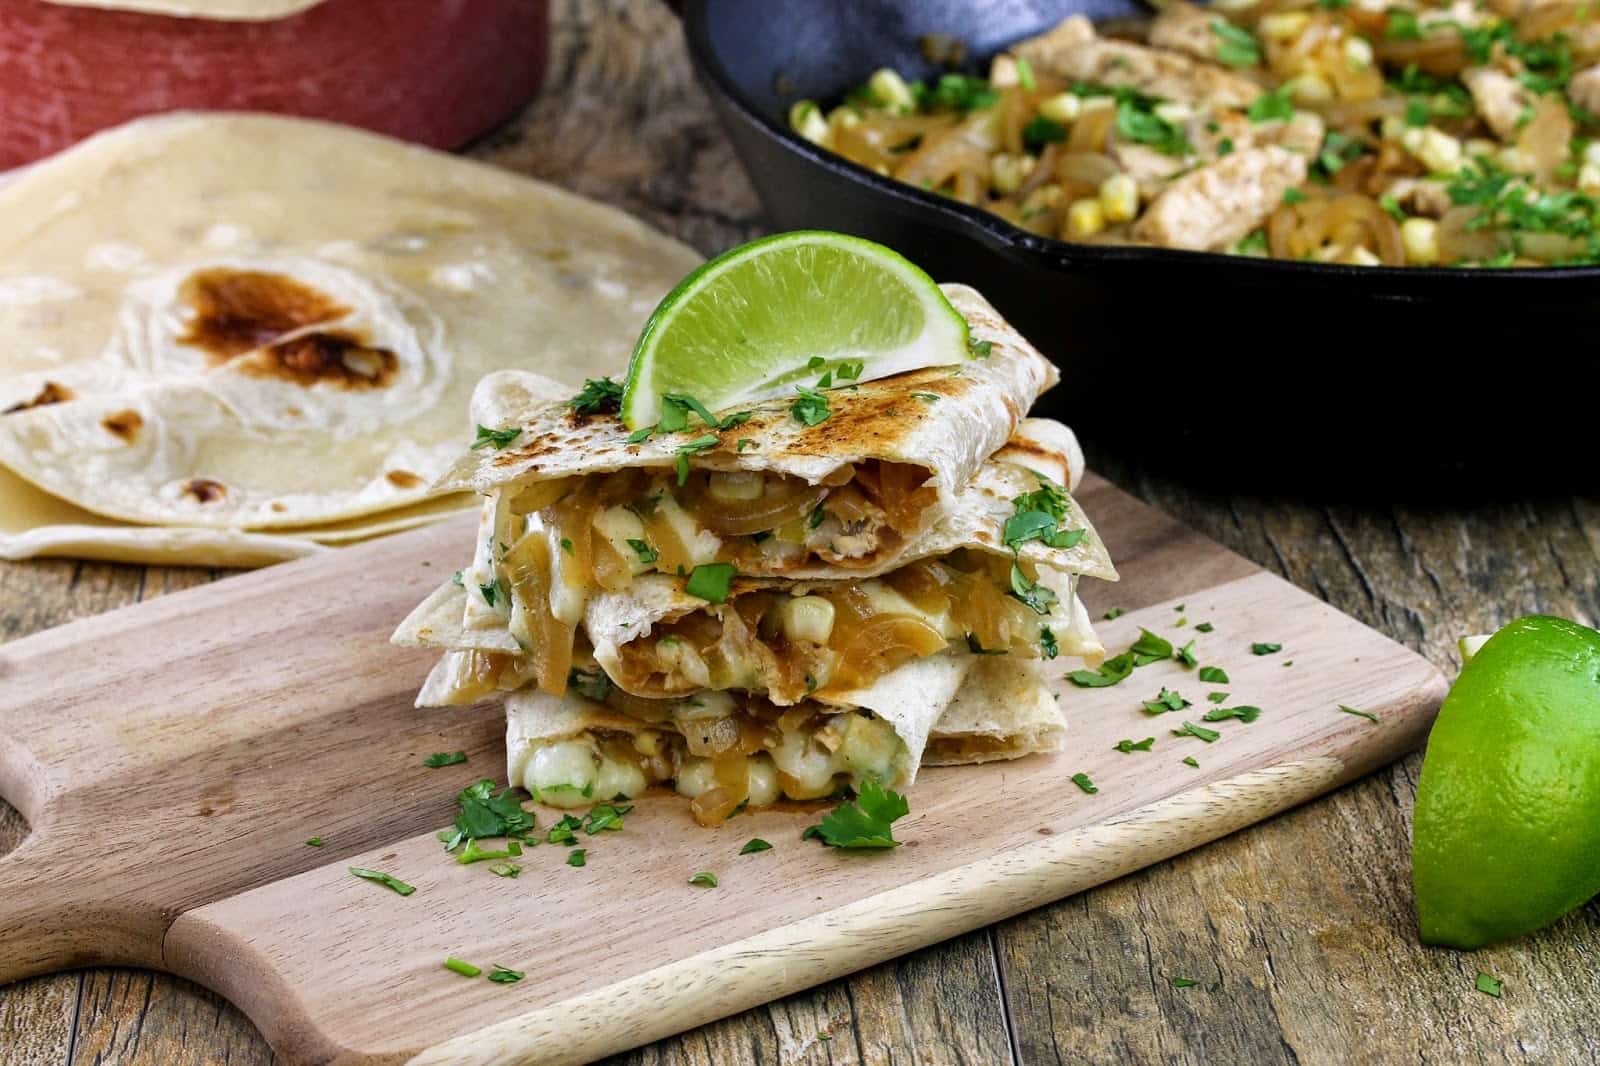 Cilantro Lime Quesadillas stacked on each other.